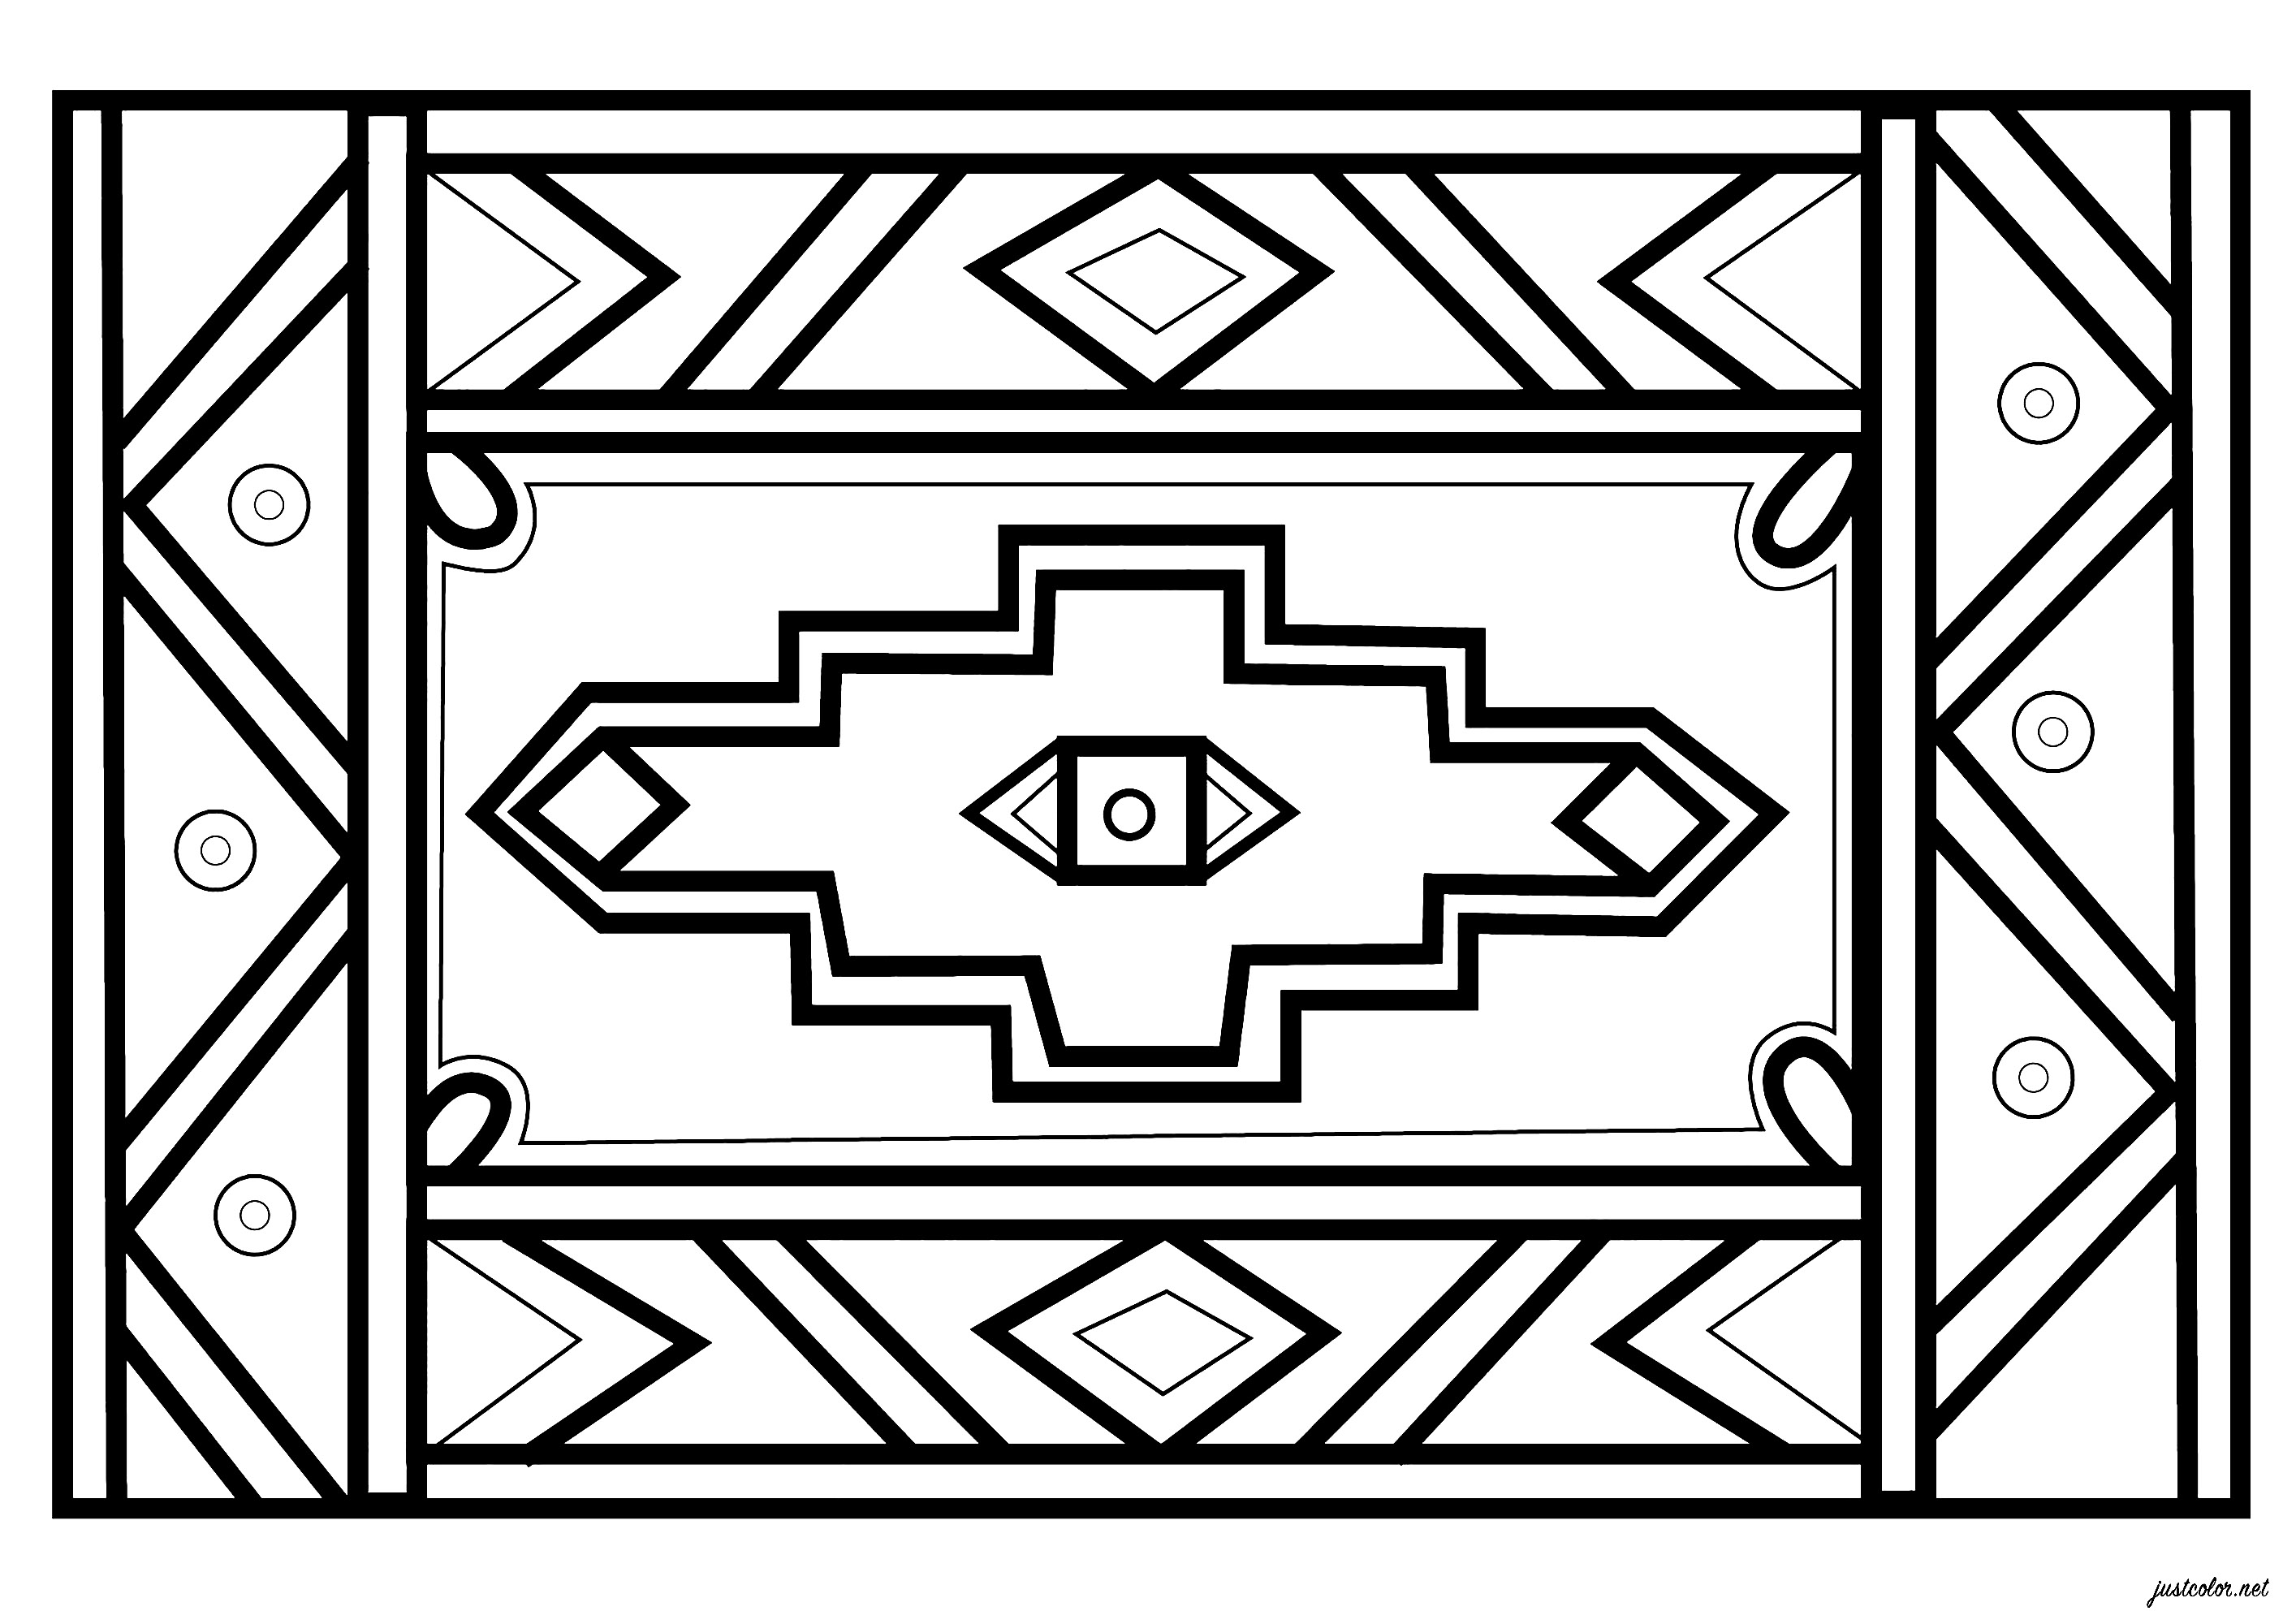 Coloring page freely inspired by the paintings of the African artist Esther Mahlangu. Esther Mahlangu, born in 1935, is a South African artist of Ndebele culture. She is known for her large contemporary paintings, in a geometric style referring to this Ndebele heritage.